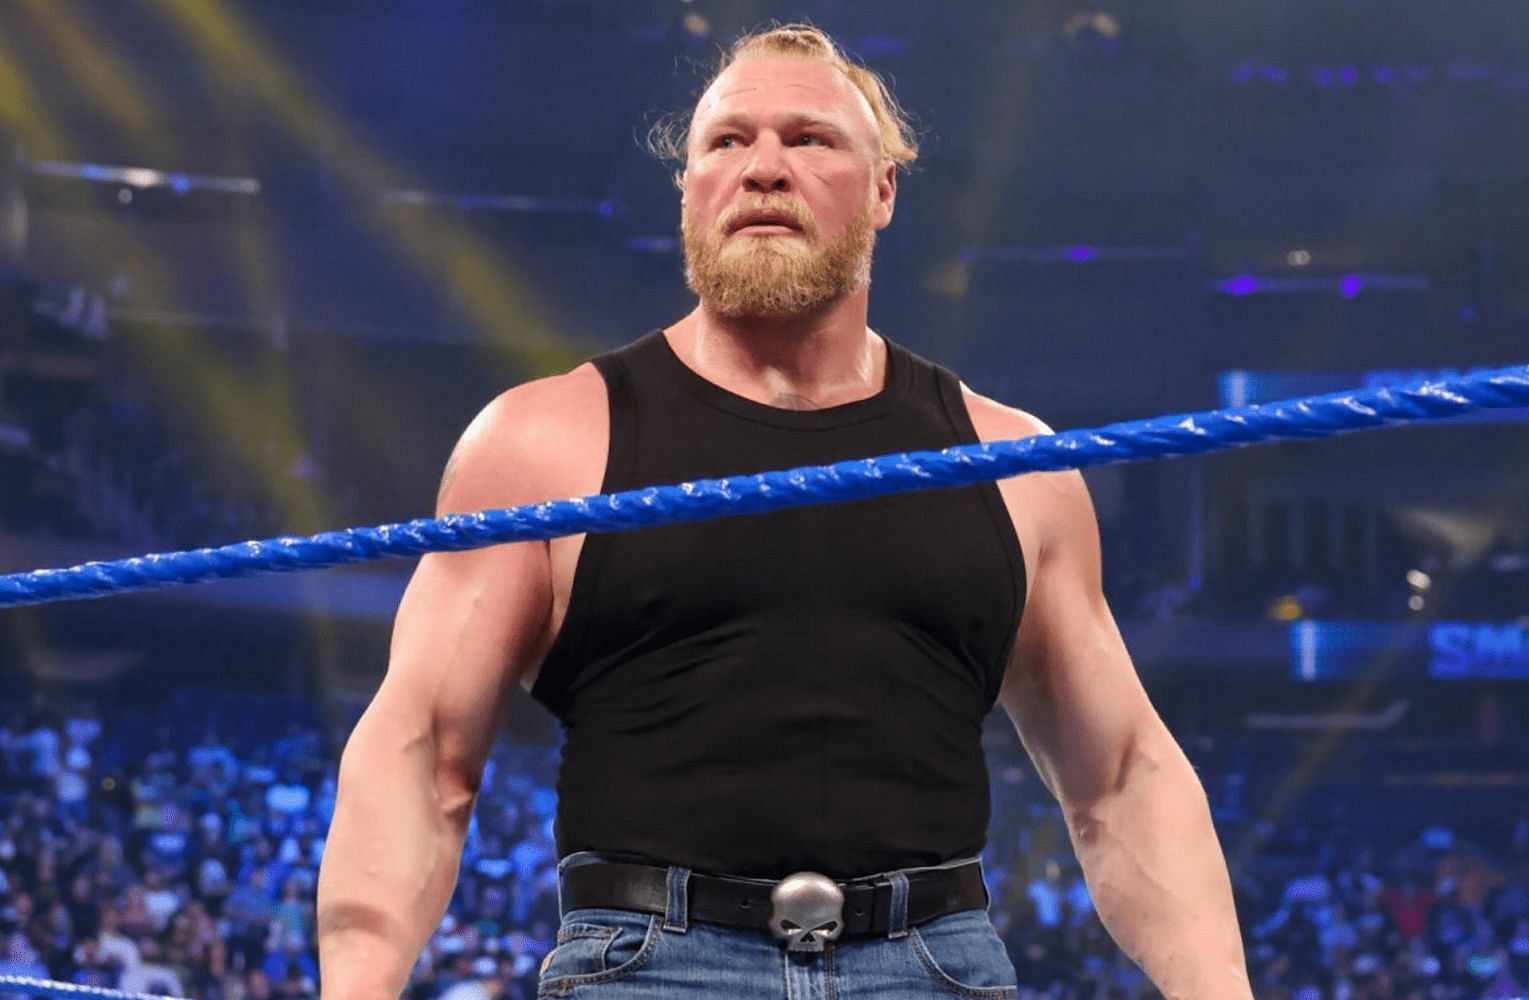 Brock Lesnar will be on SmackDown next week